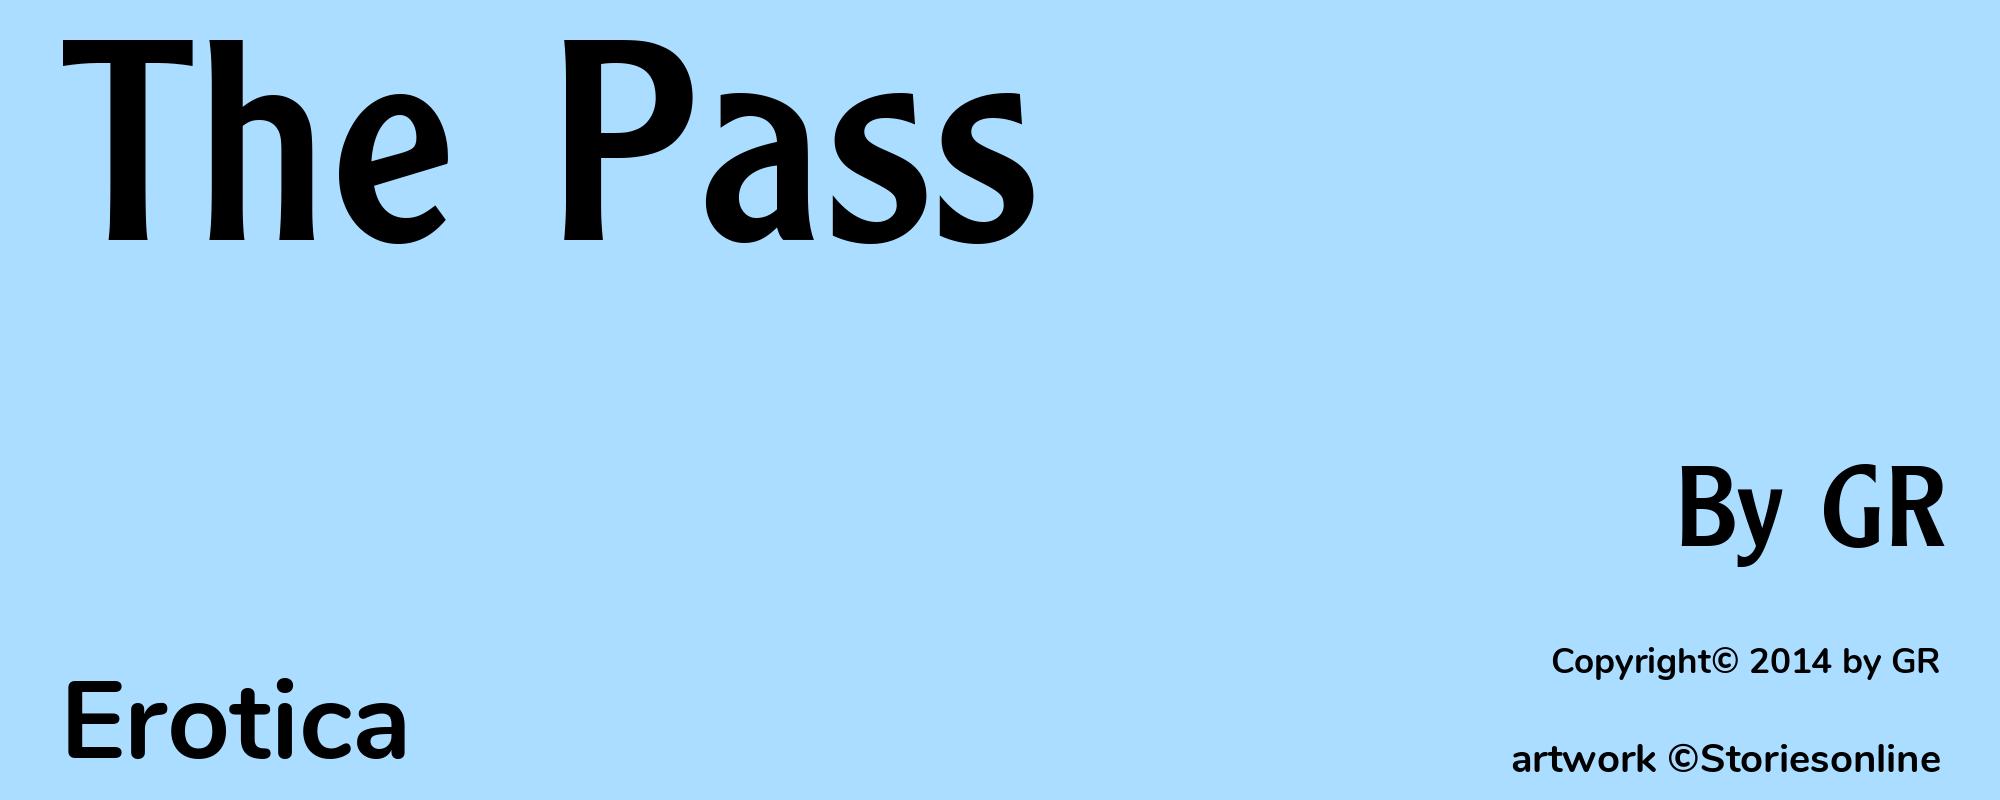 The Pass - Cover